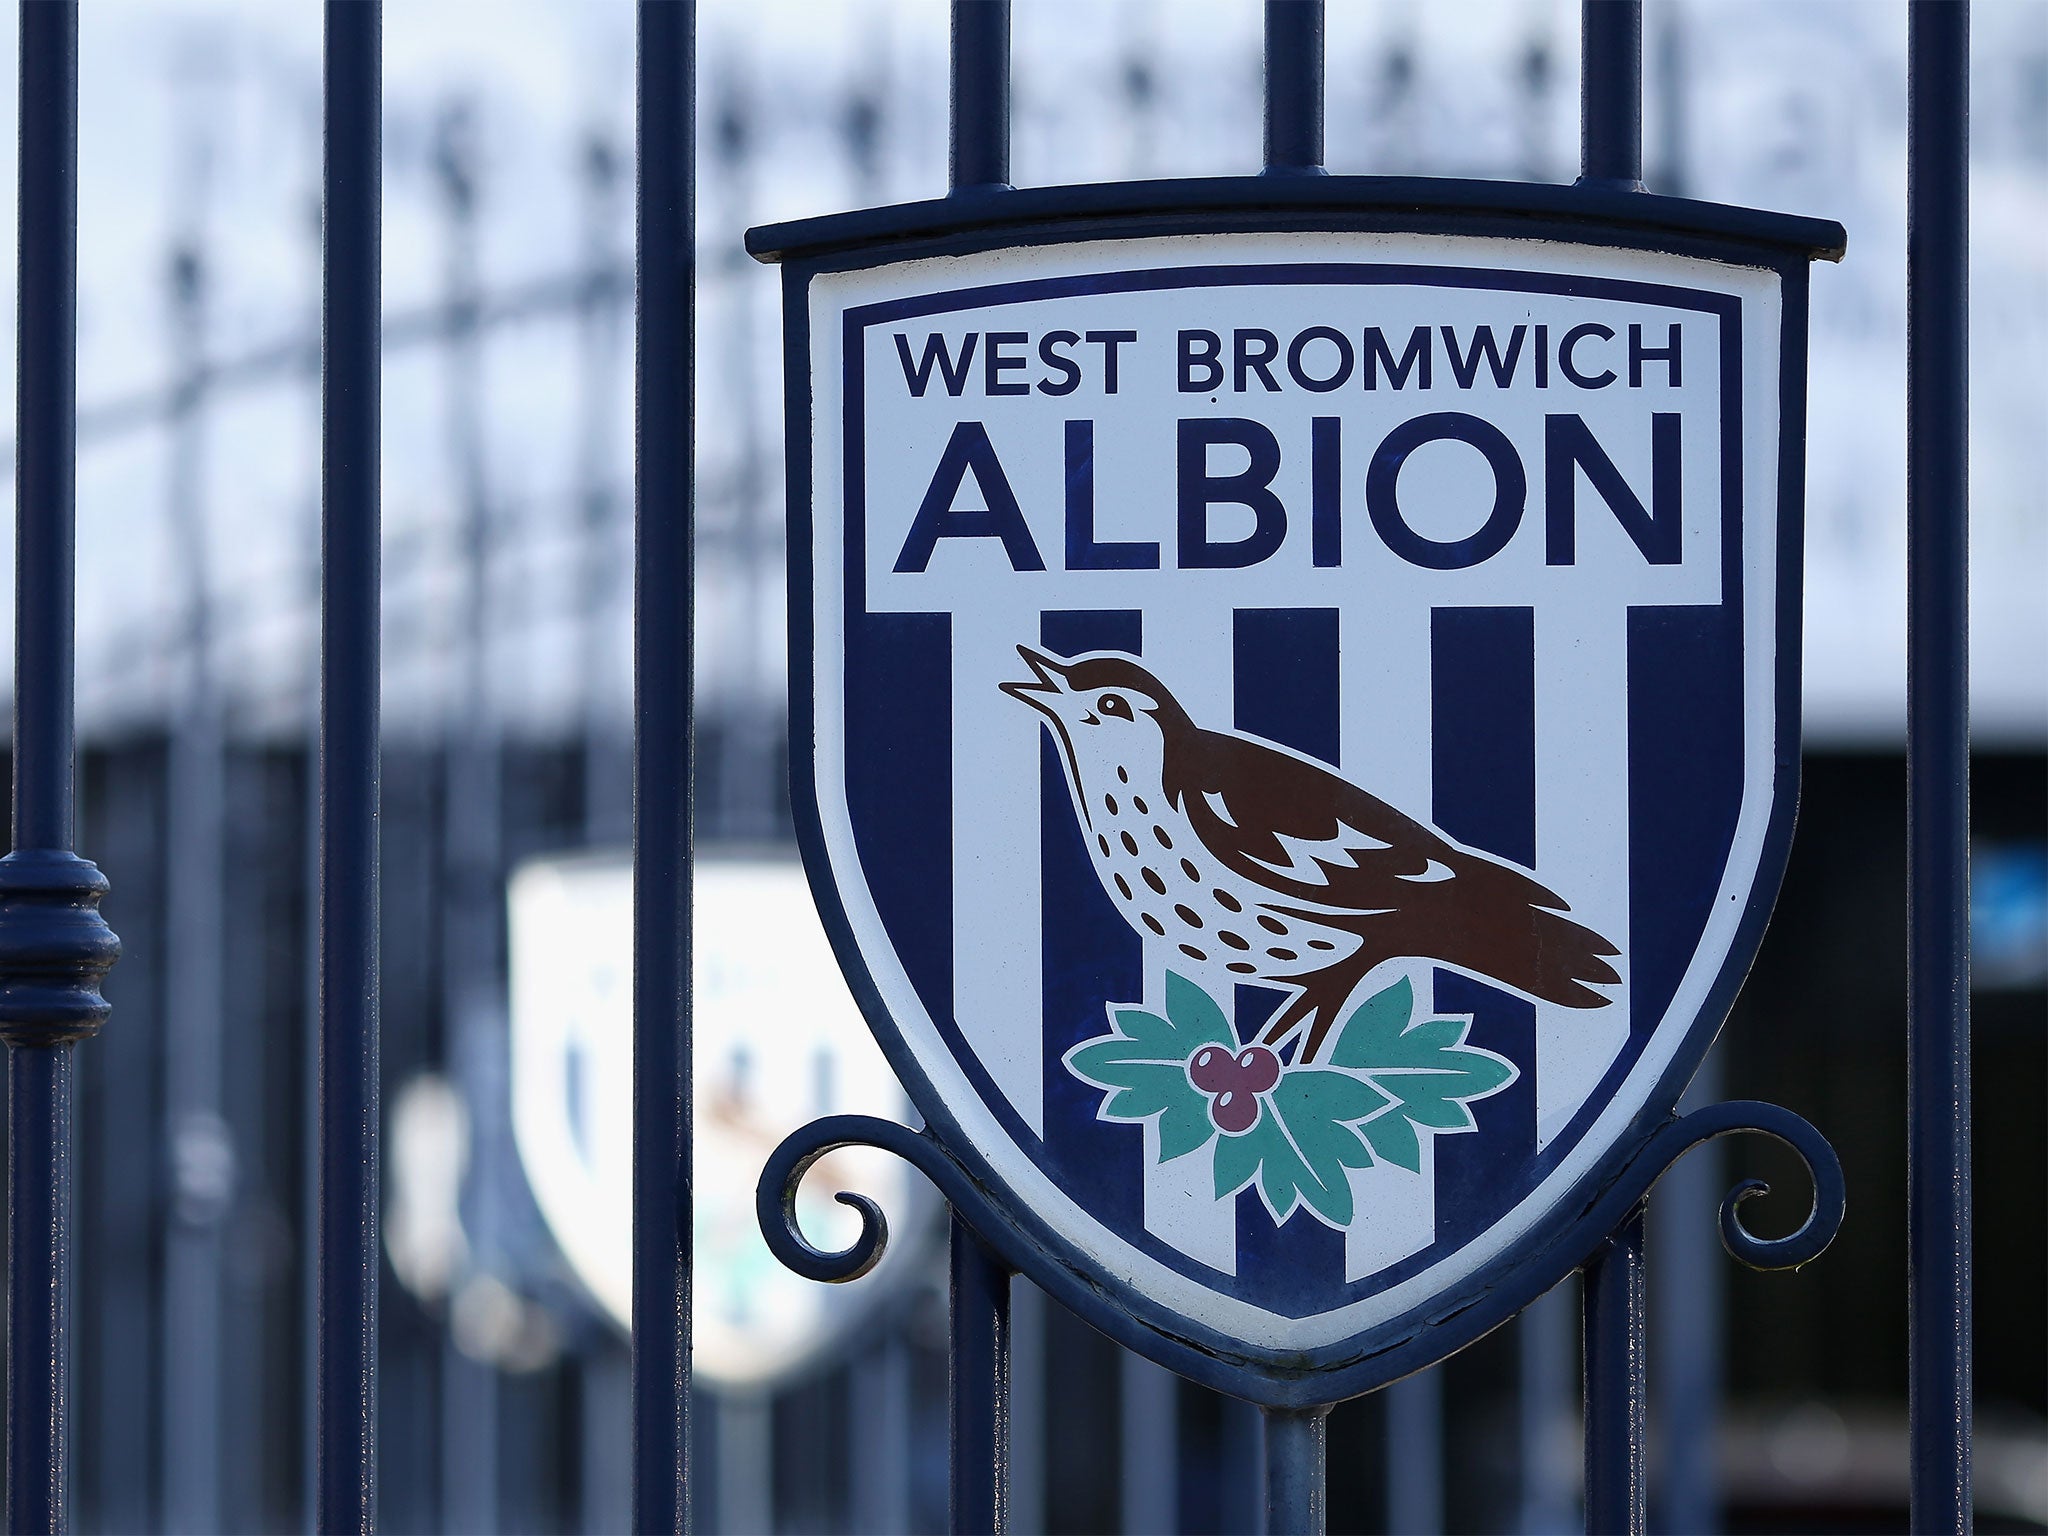 West Bromwich Albion sack chairman and chief executive after poor run of results, with club sitting bottom